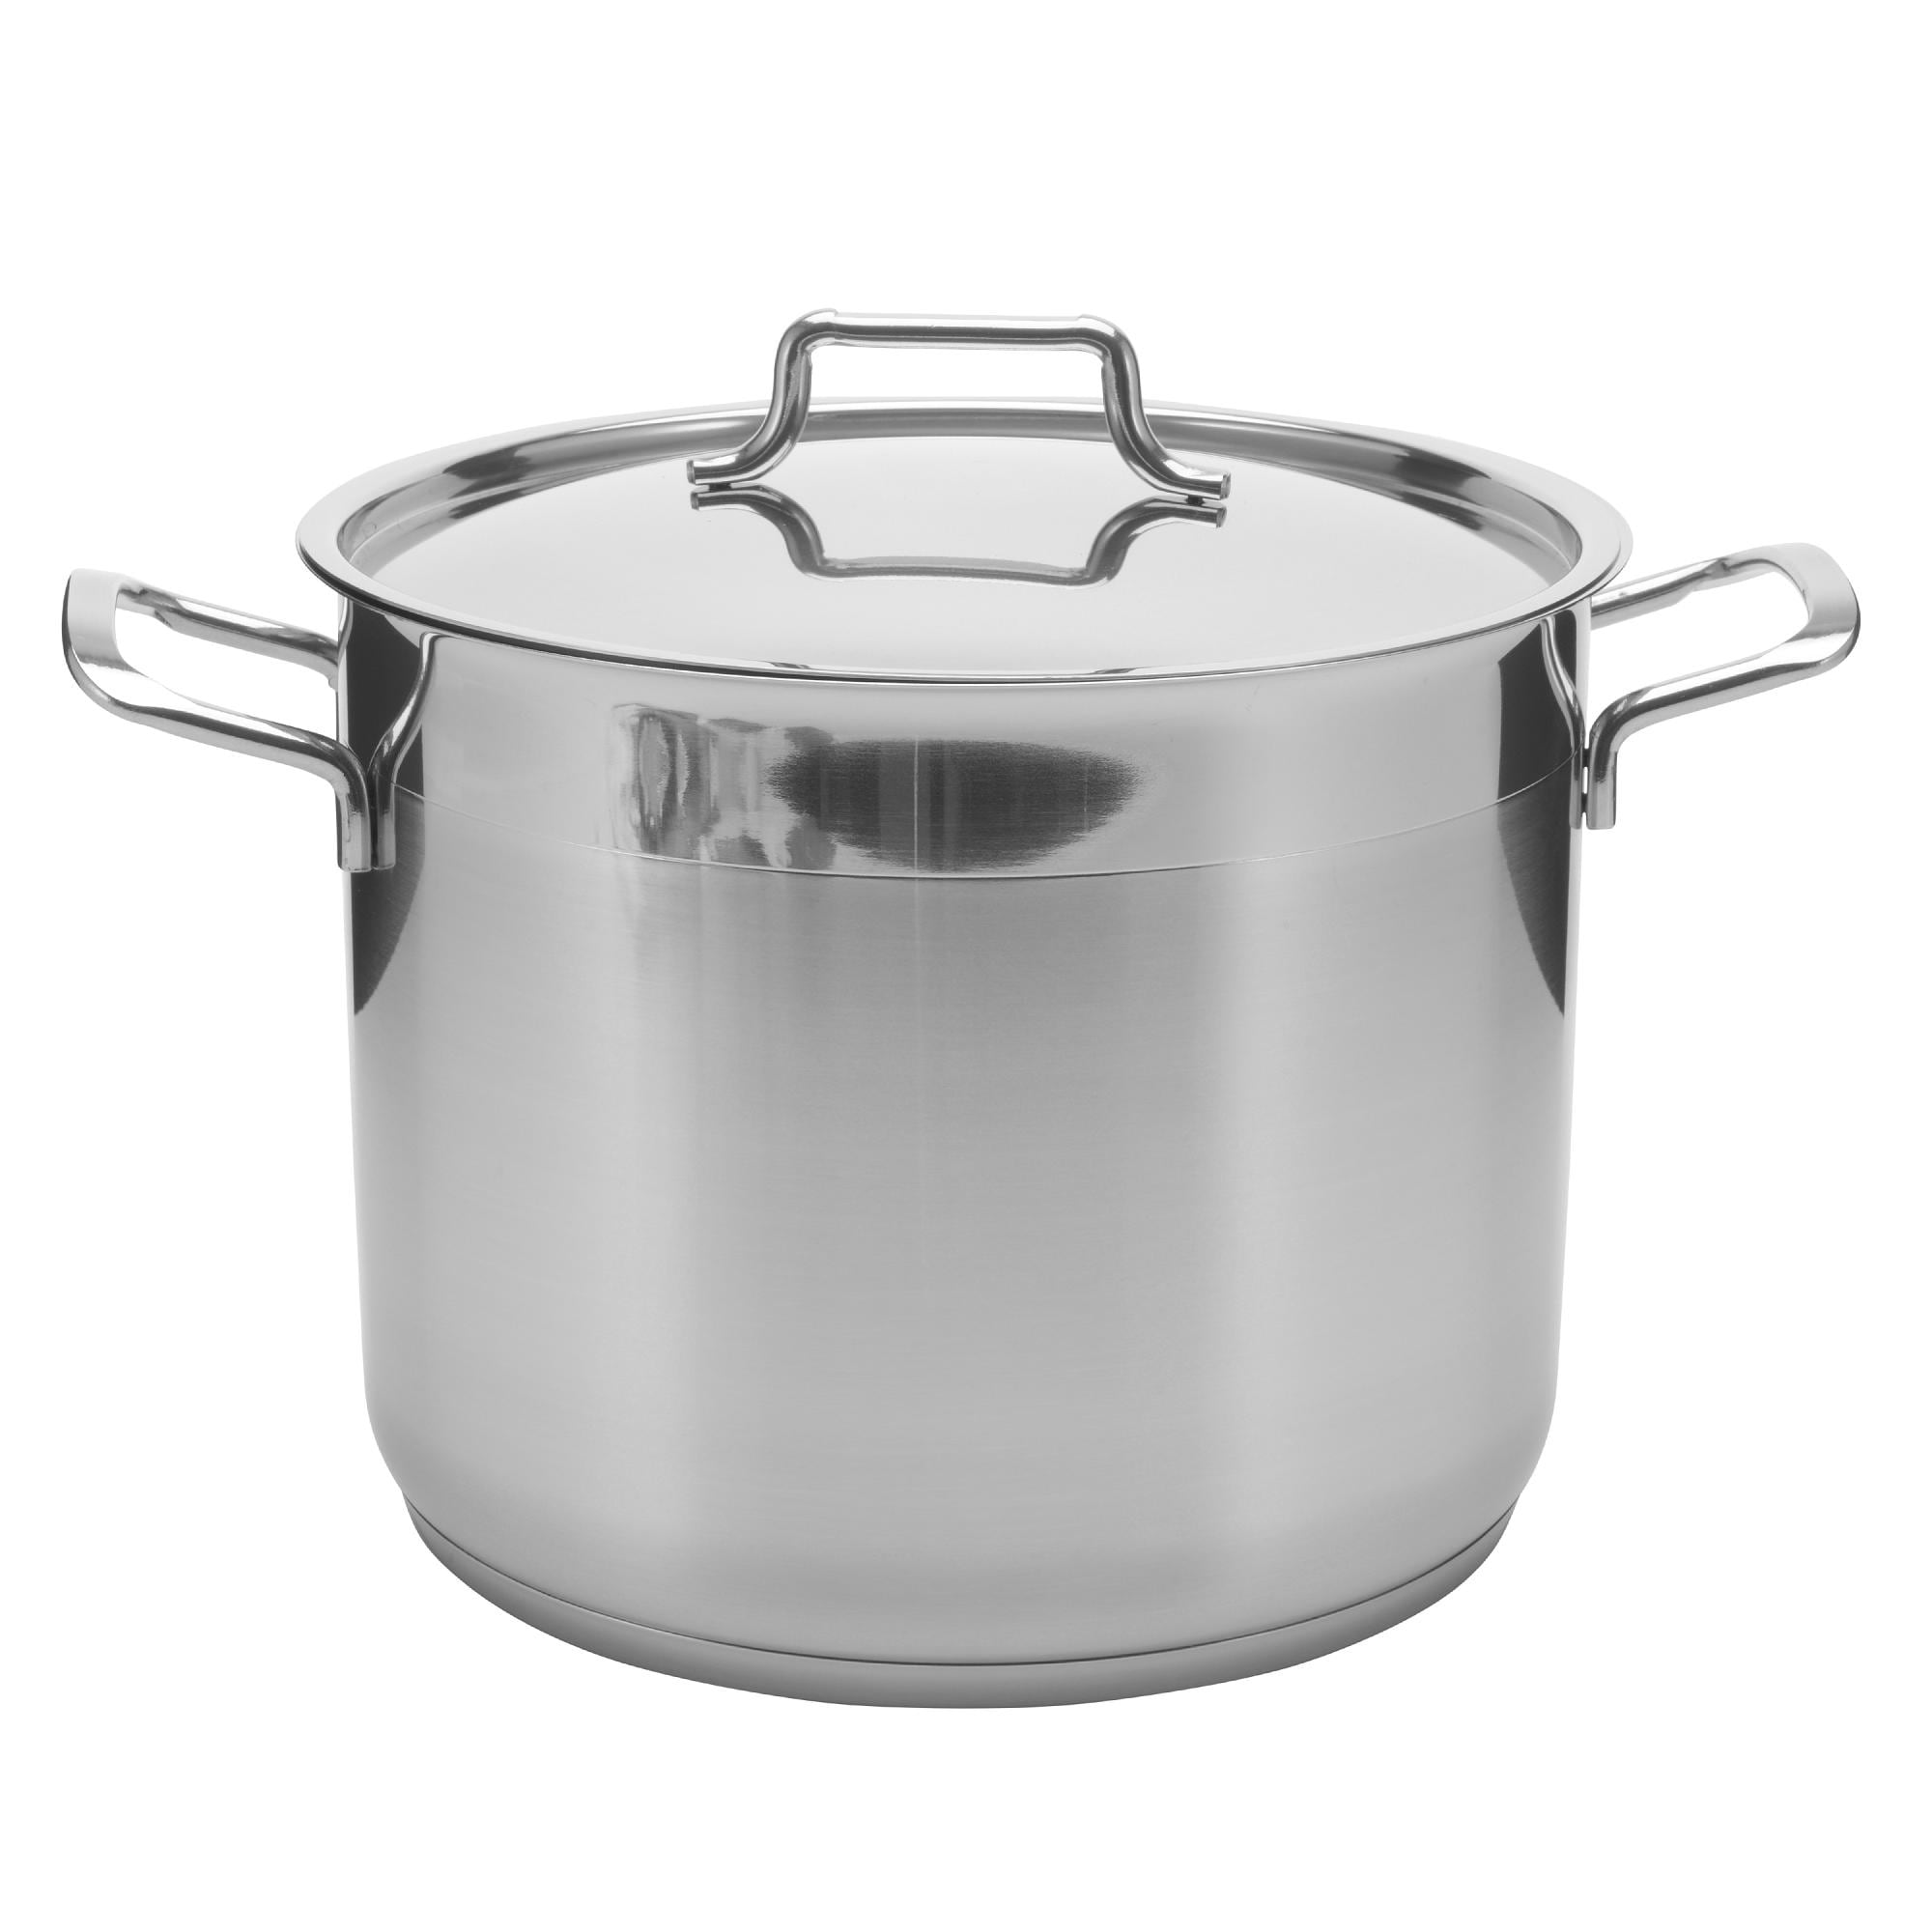  Cuisinart 76610-26G Chef's Classic 10-Quart Stockpot with Glass  Cover,Brushed Stainless: Home & Kitchen